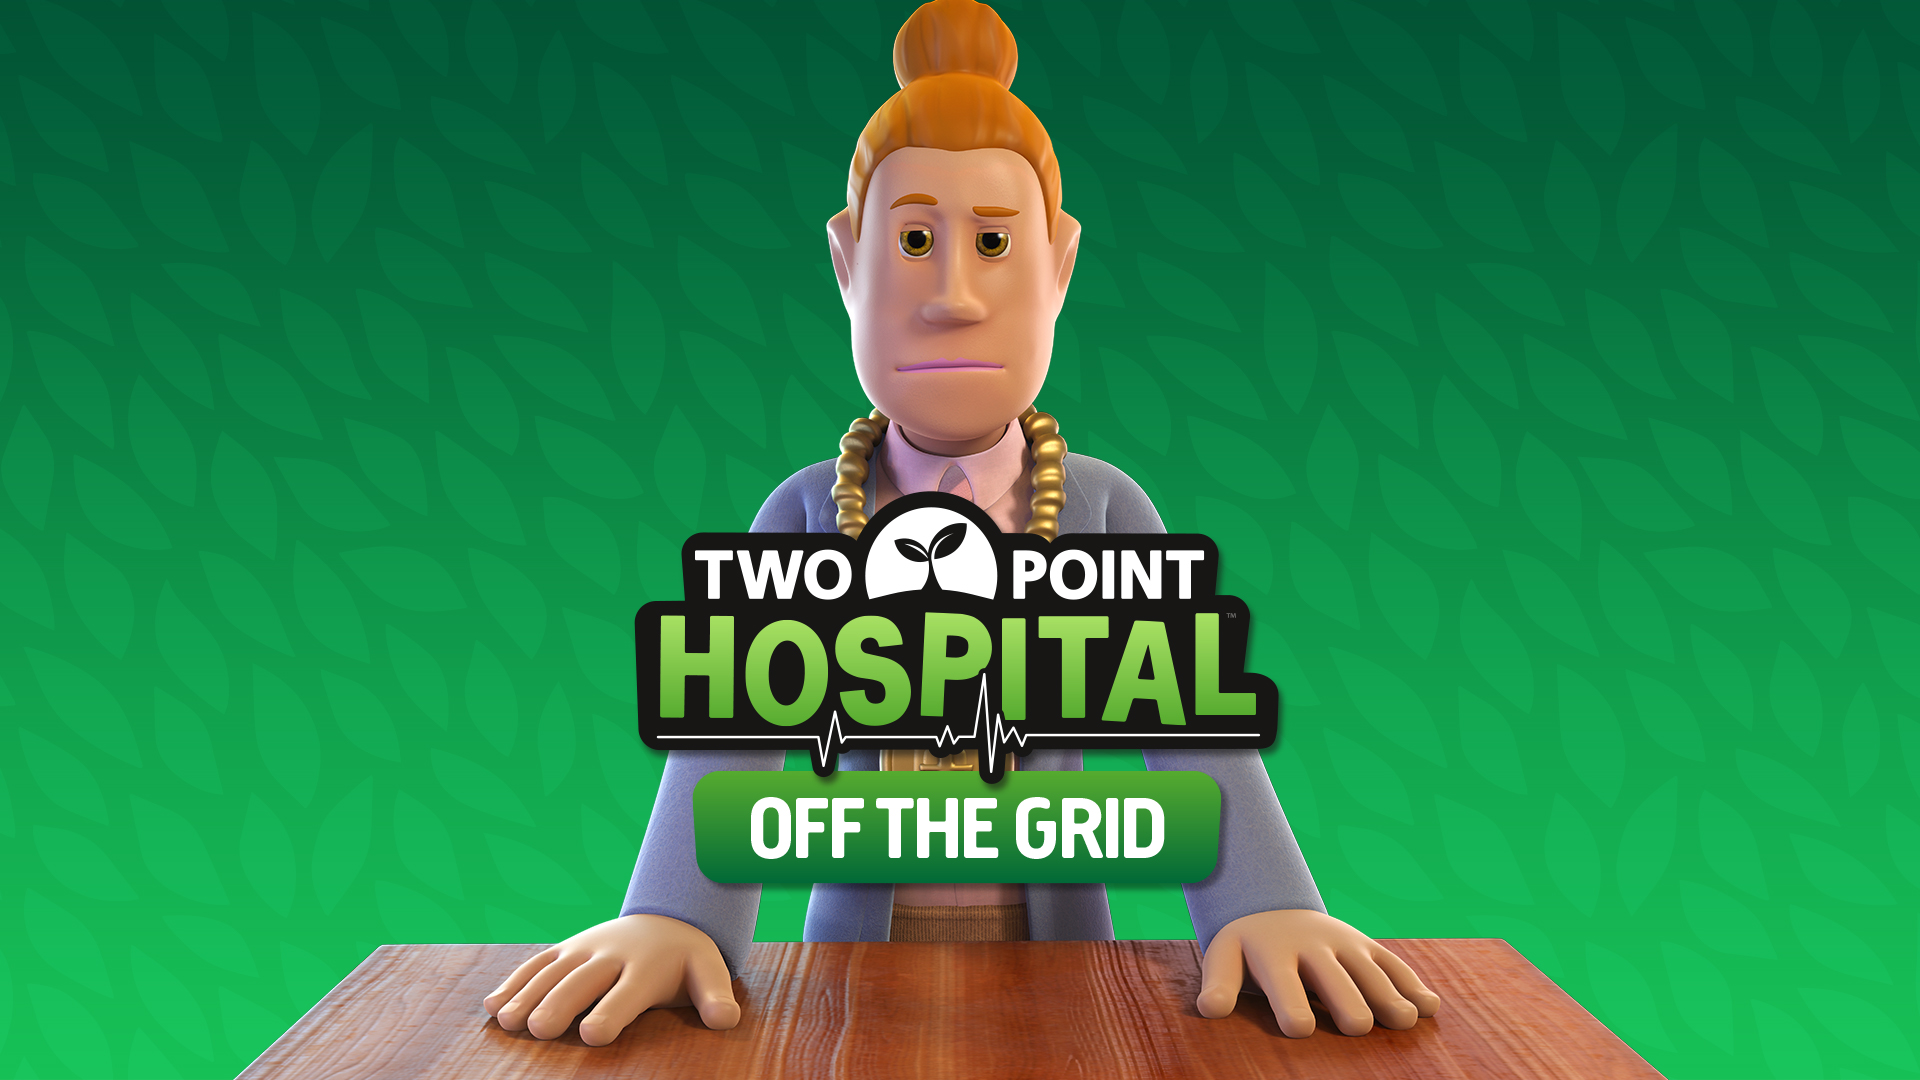 download two point hospital off the grid